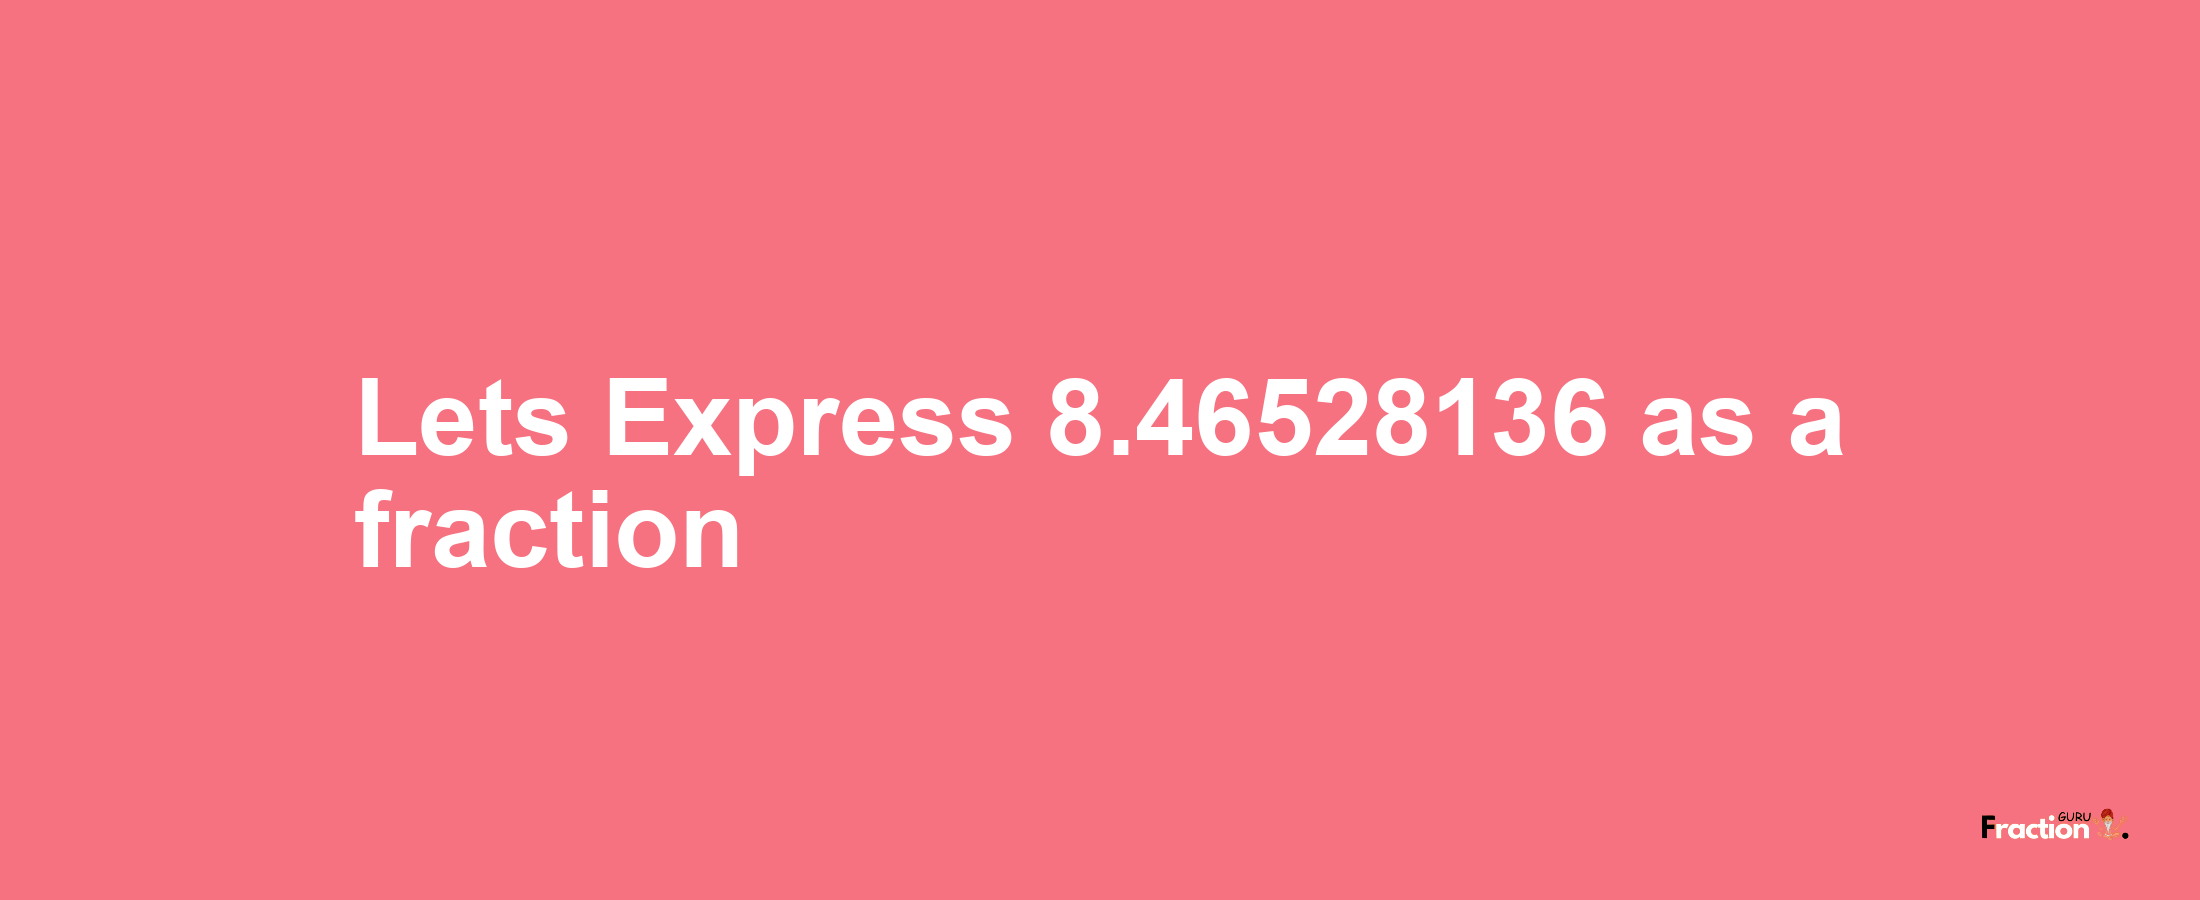 Lets Express 8.46528136 as afraction